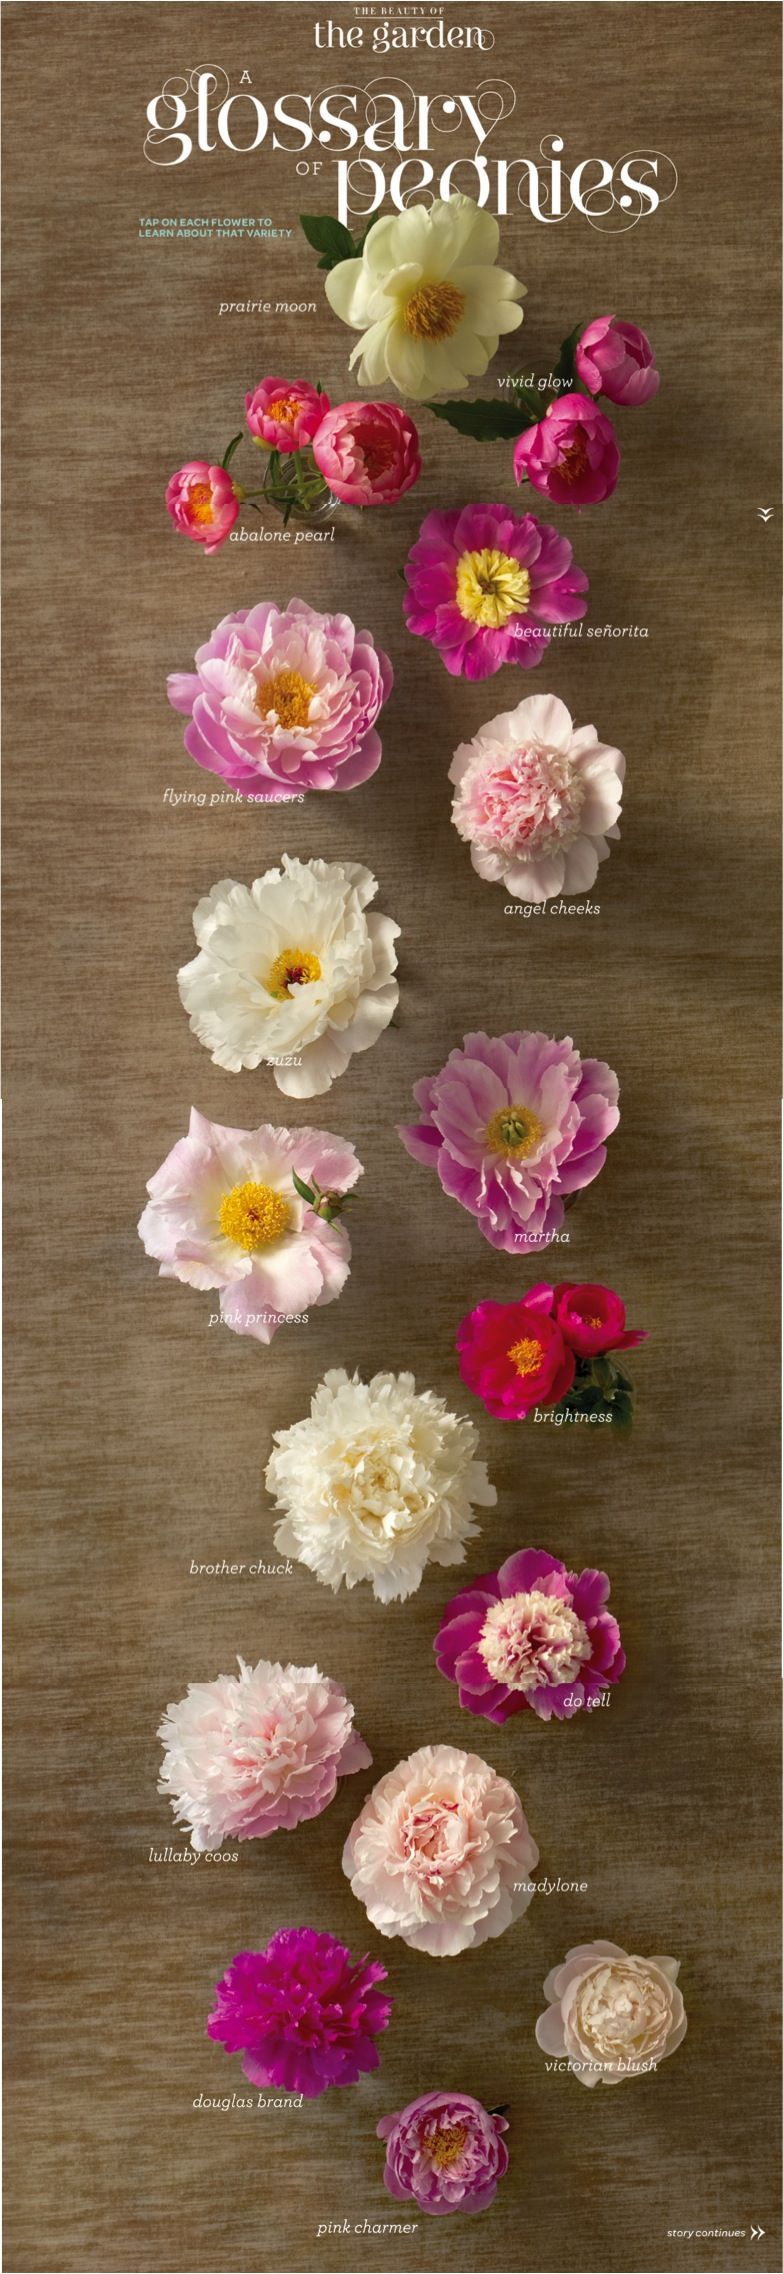 want Peonies in my bouquet. Didnt know there are so many different kinds!